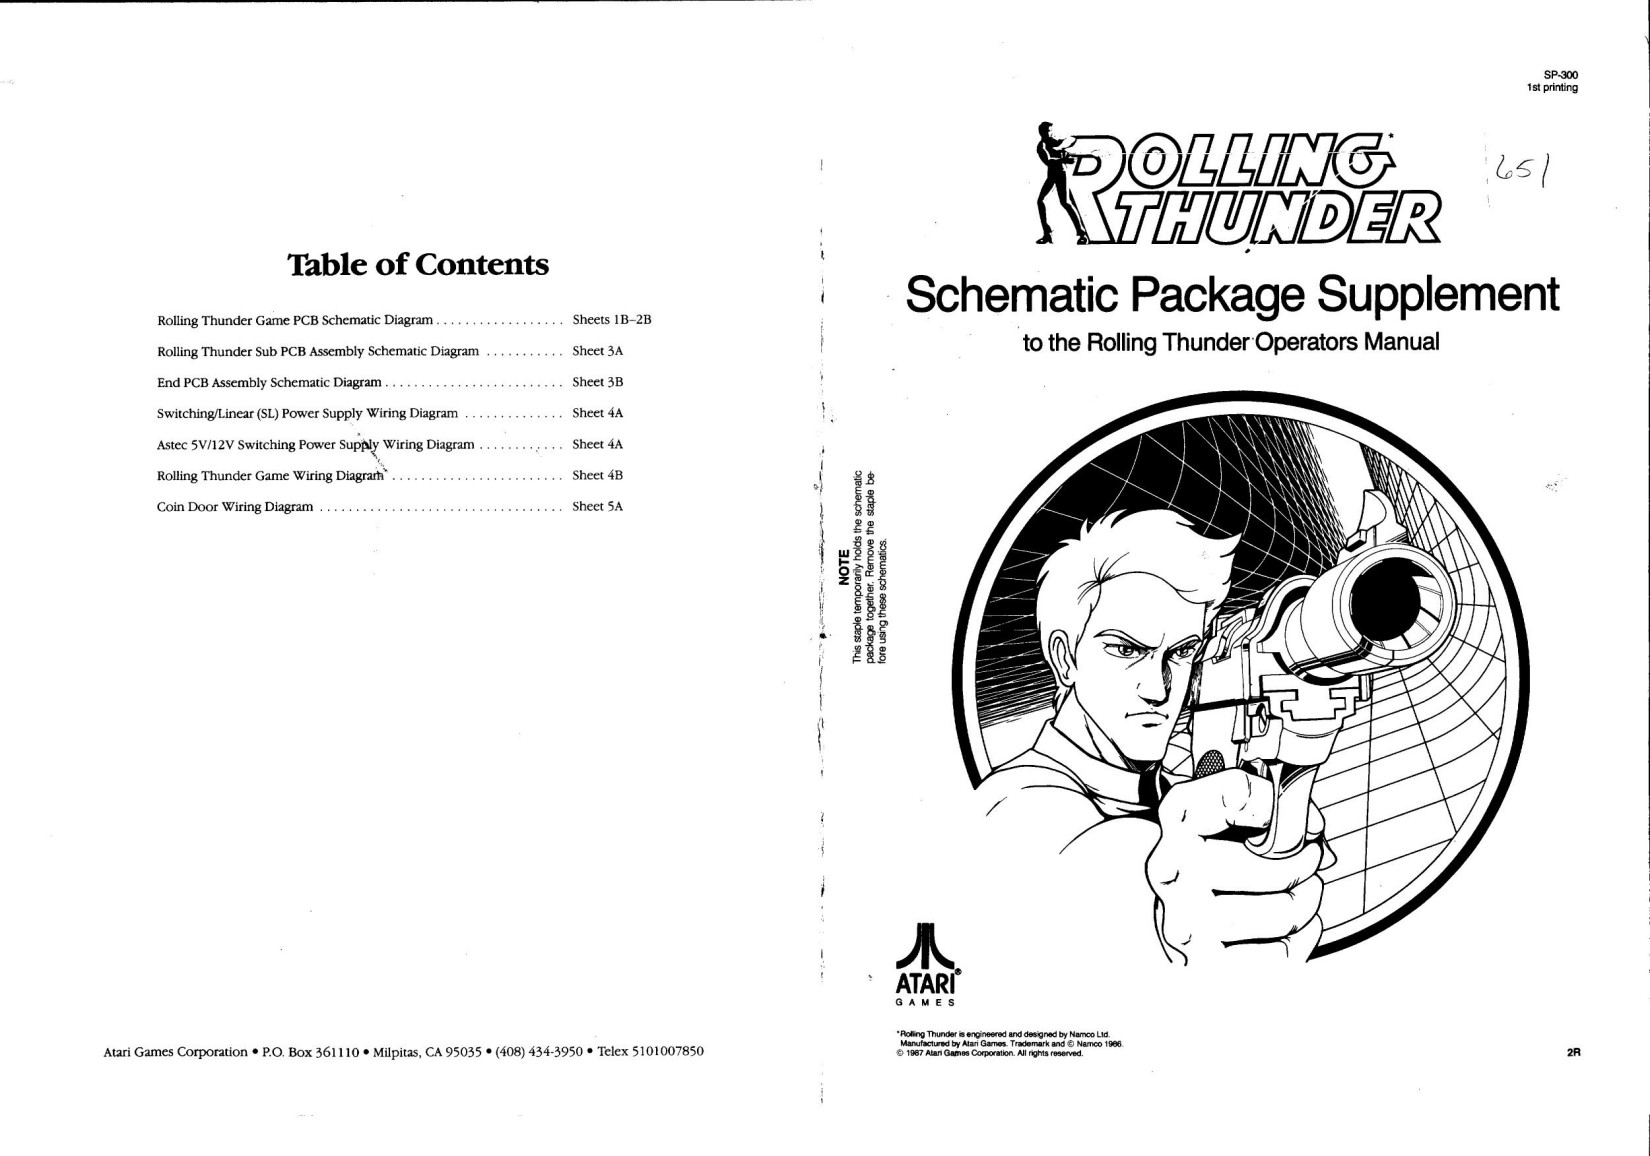 Rolling Thunder (SP-300 1st Printing) (Schematic Package) (U)